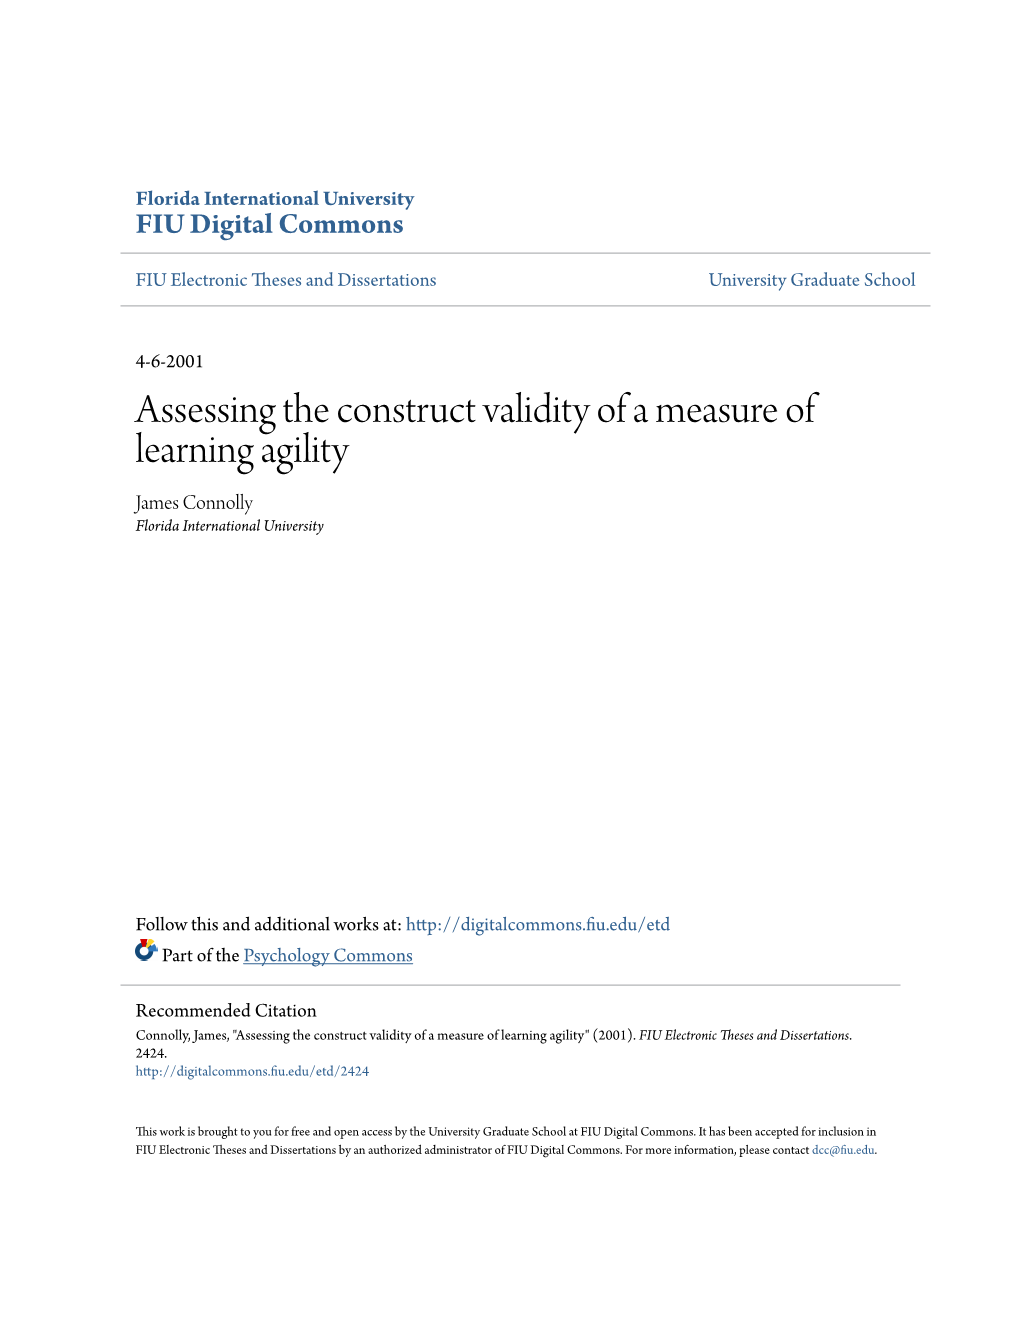 Assessing the Construct Validity of a Measure of Learning Agility James Connolly Florida International University